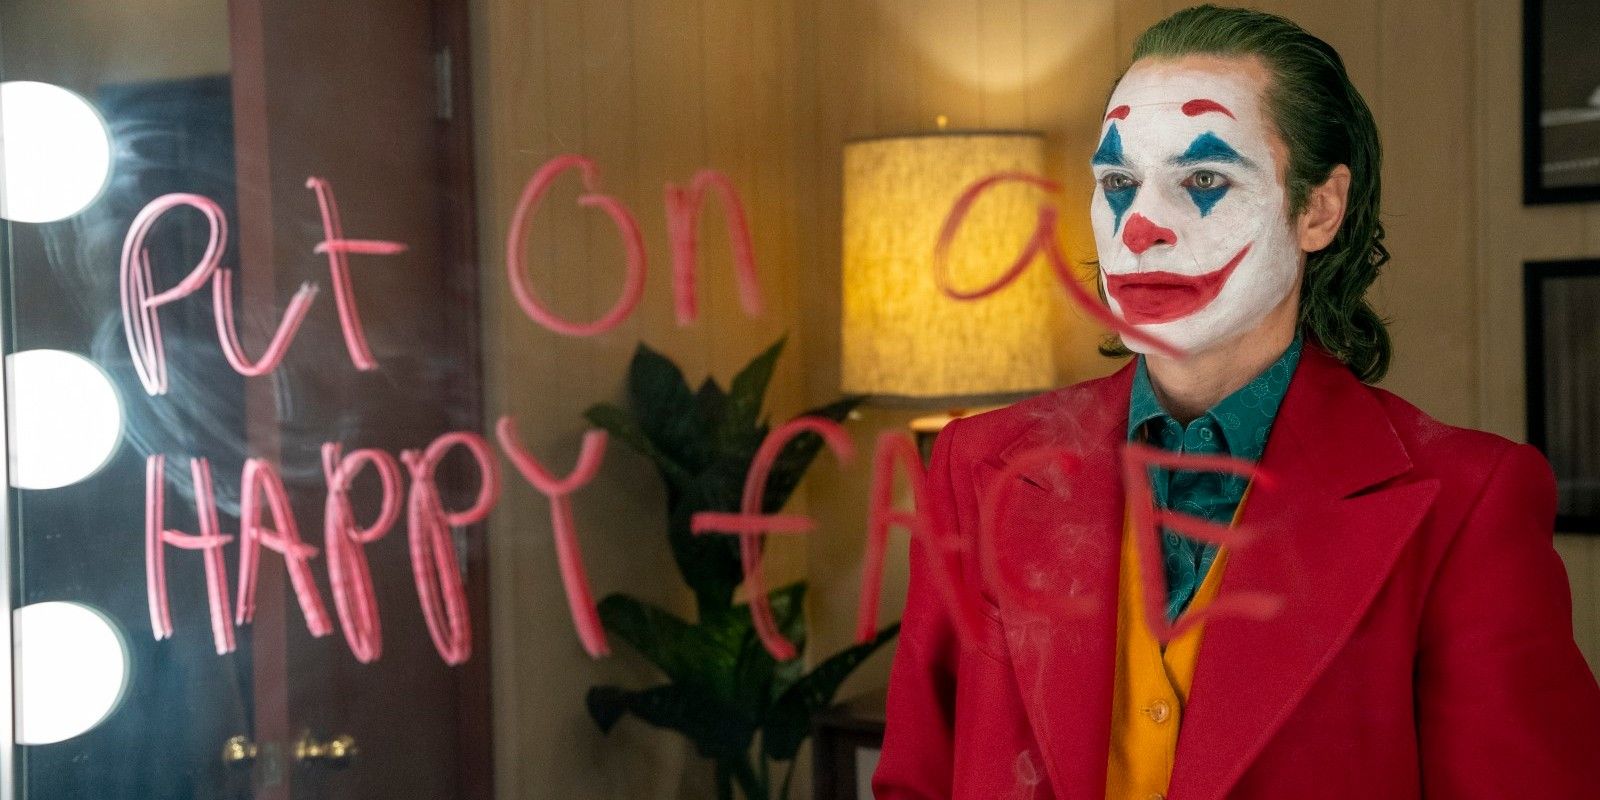 28 HQ Pictures Joker Girlfriend Movie 2019 : Themes, Messages, and Symbolism from the Movie "Joker ...